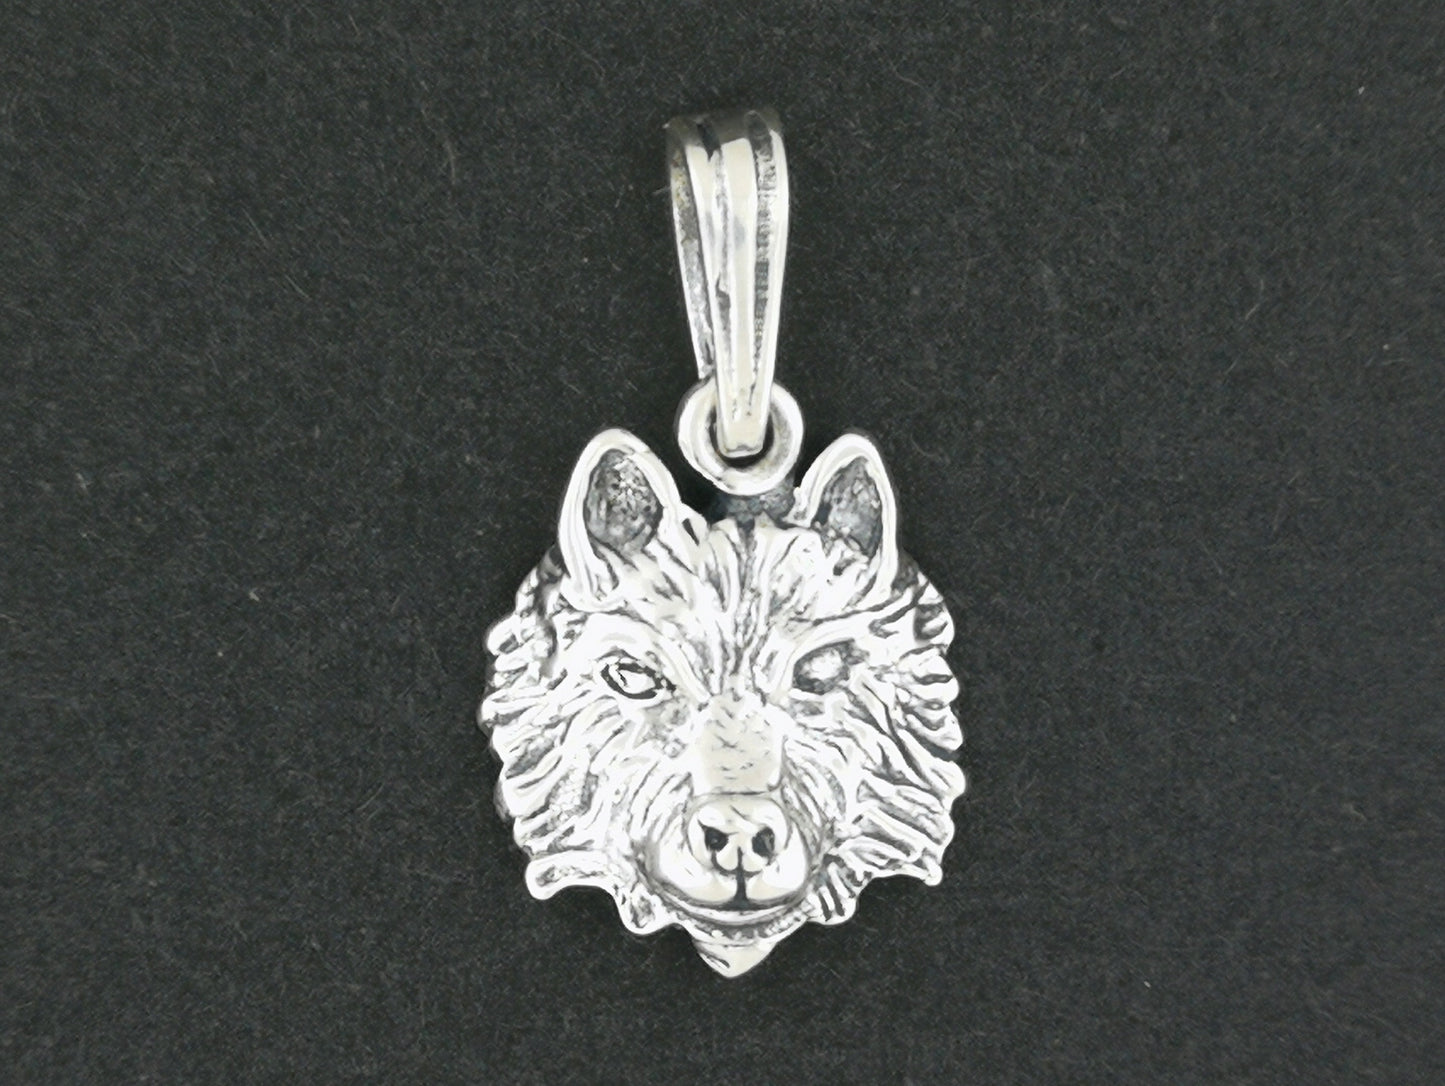 Wolf Head Charm Pendant in Sterling Silver or Antique Bronze, Wolf Head Pendant, Silver Wolf Pendant, Bronze Wolf Pendant, Bronze Wolf Head Pendant, Silver Wolf Head Pendant, Silver Wolf Jewelry, Silver Wolf Jewellery, Bronze Wolf Jewelry, Bronze Wolf Jewellery, Bronze Wolf Charm, Silver Wolf Charm